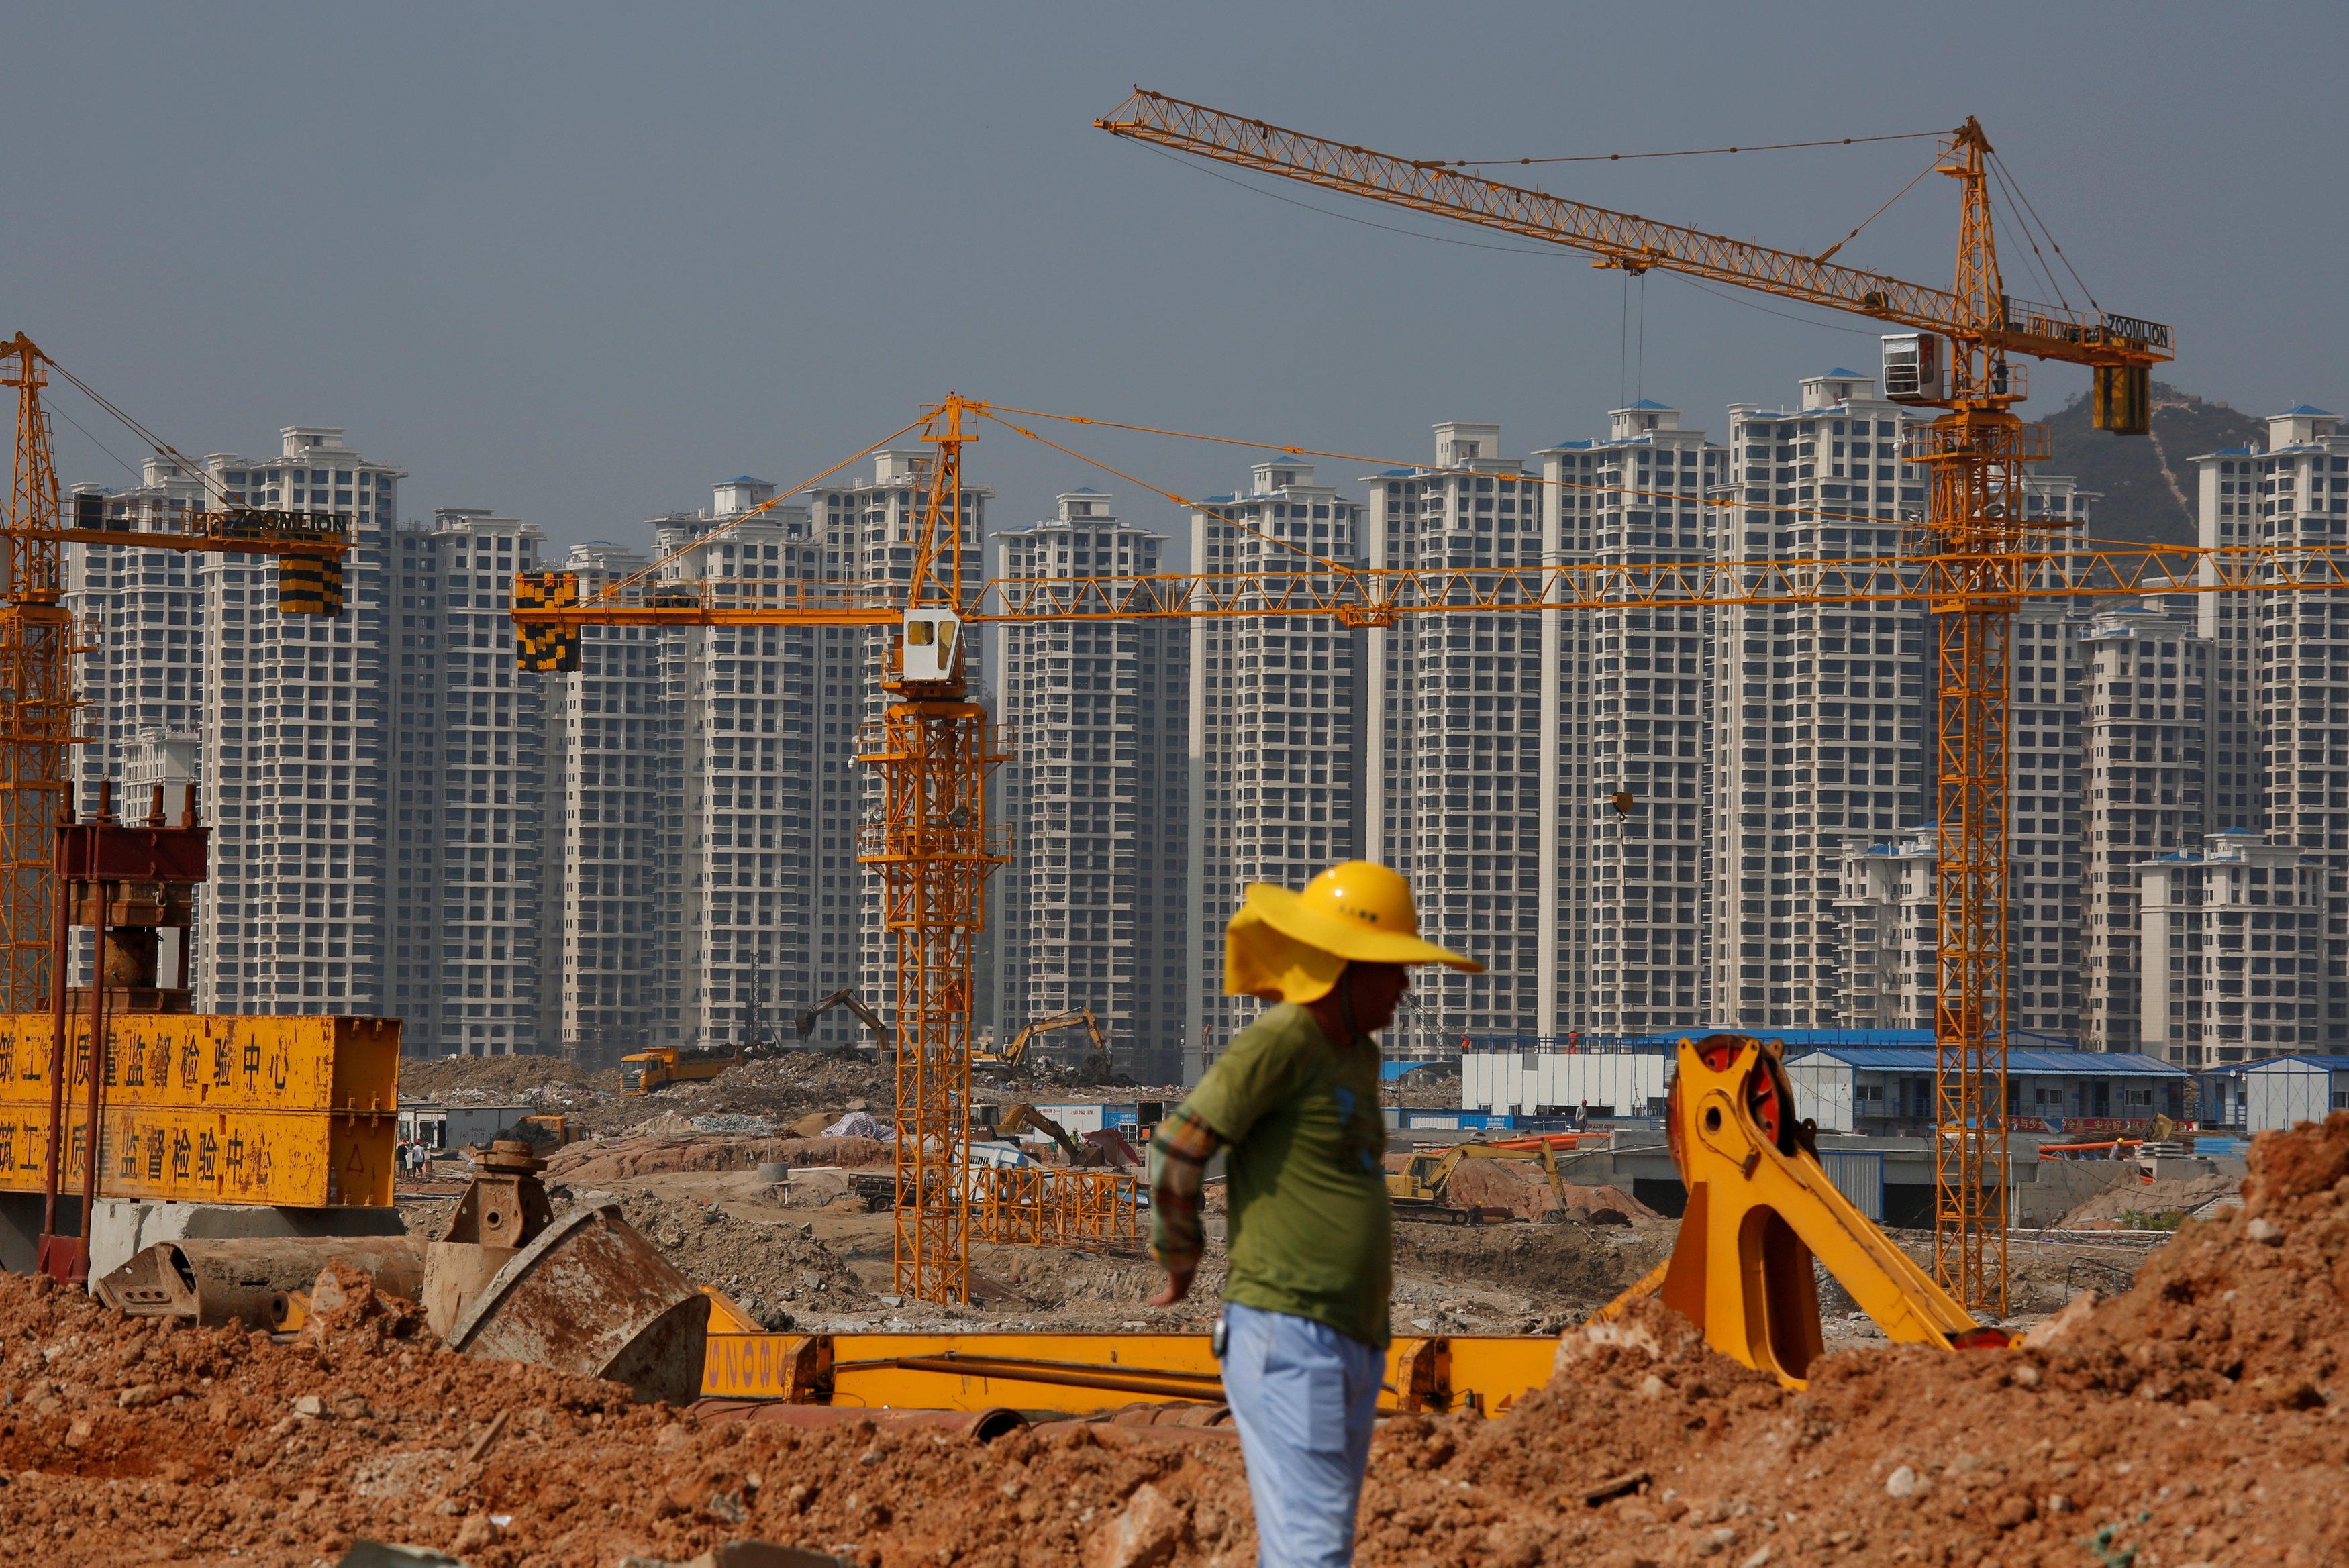 Residential apartments are under construction at Hengqin Island adjacent to Macau, China September 13, 2017.  REUTERS/Bobby Yip